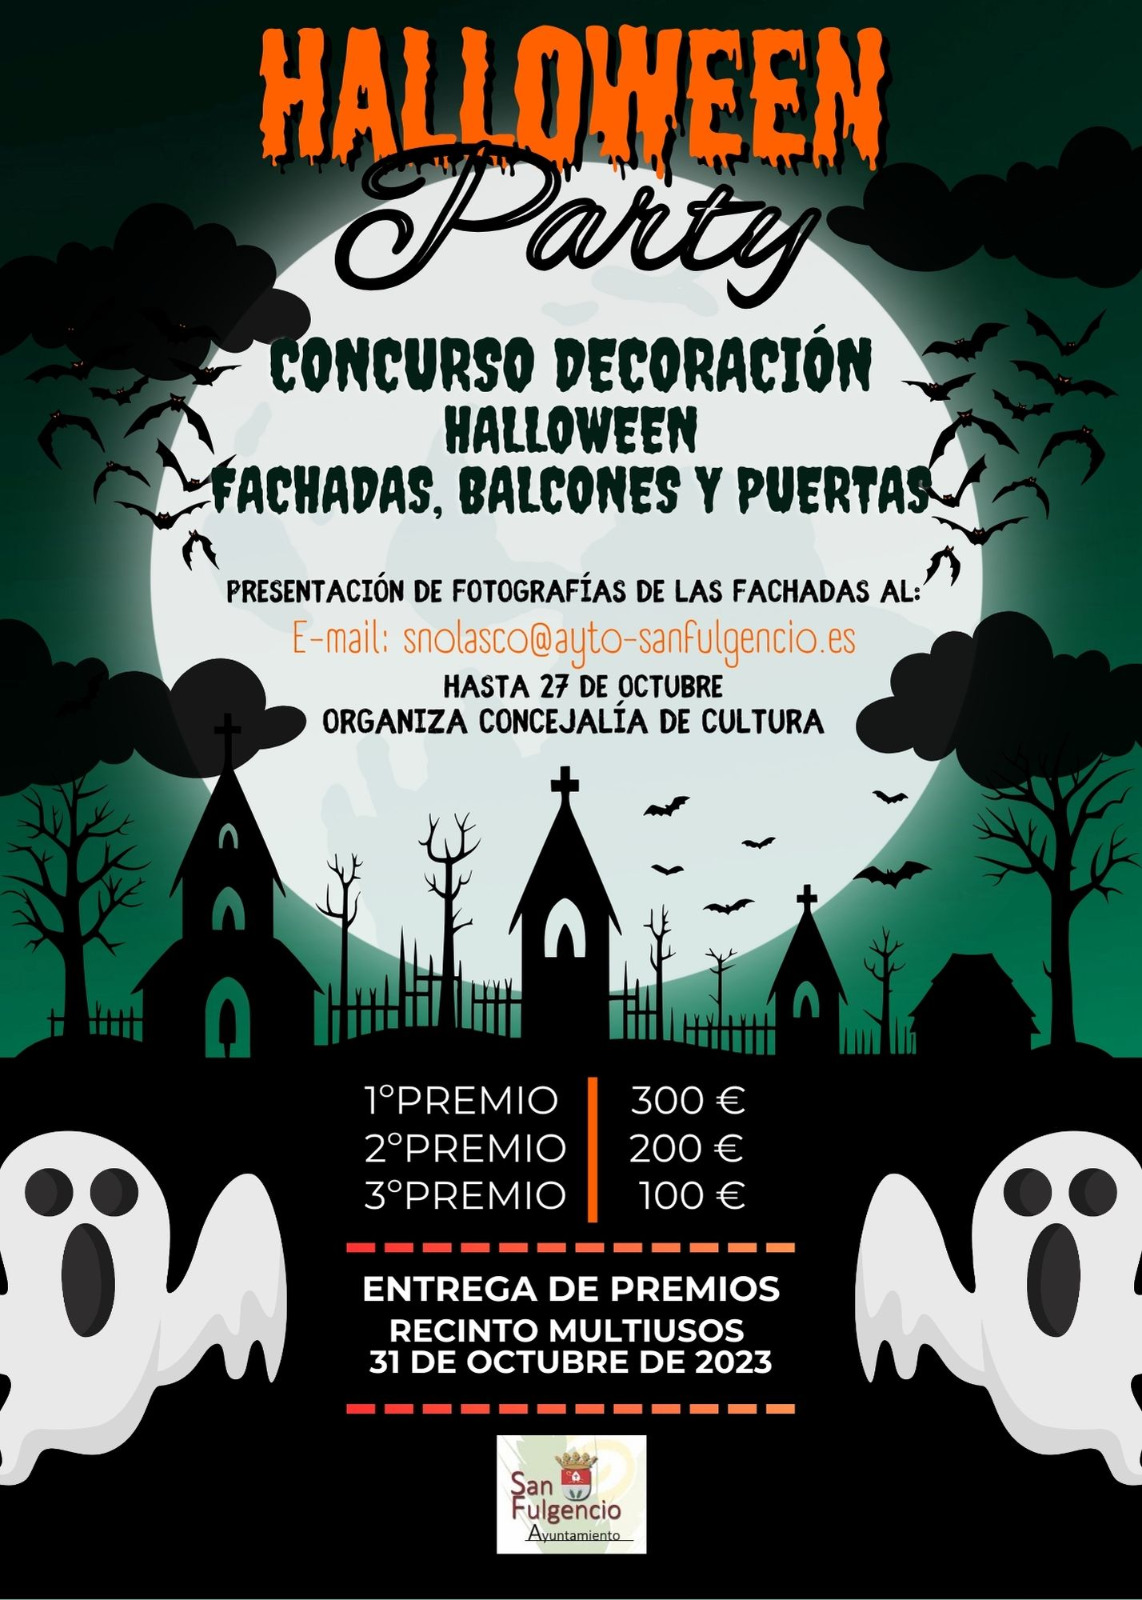 Halloween decoration competition for façades, balconies and doors 2023